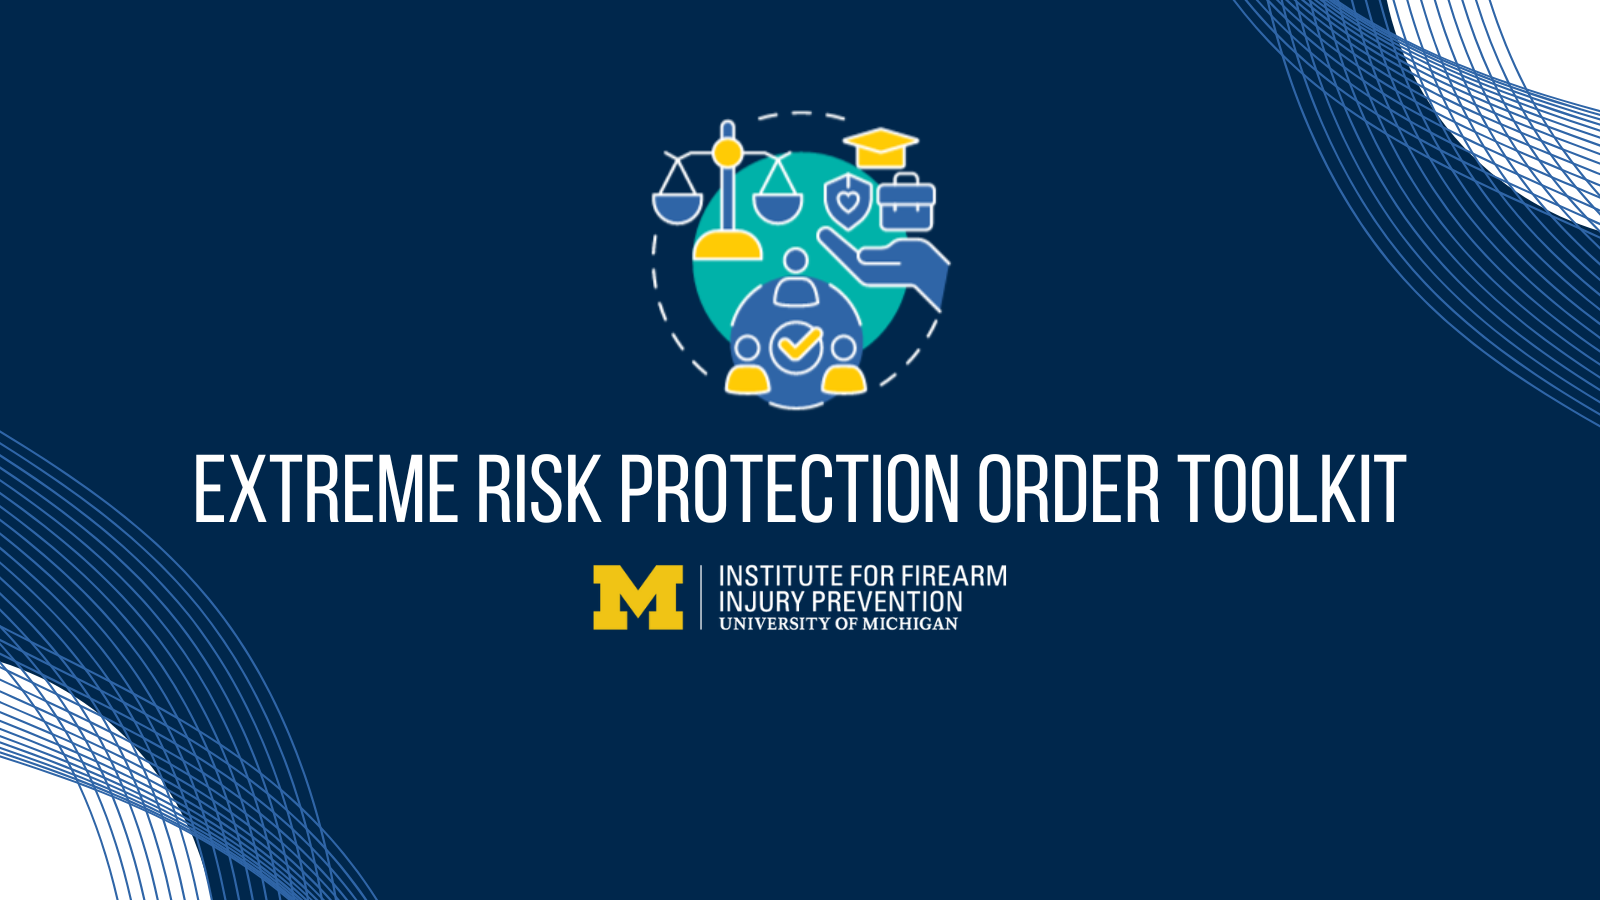 Extreme risk protection order: What to know if needed 